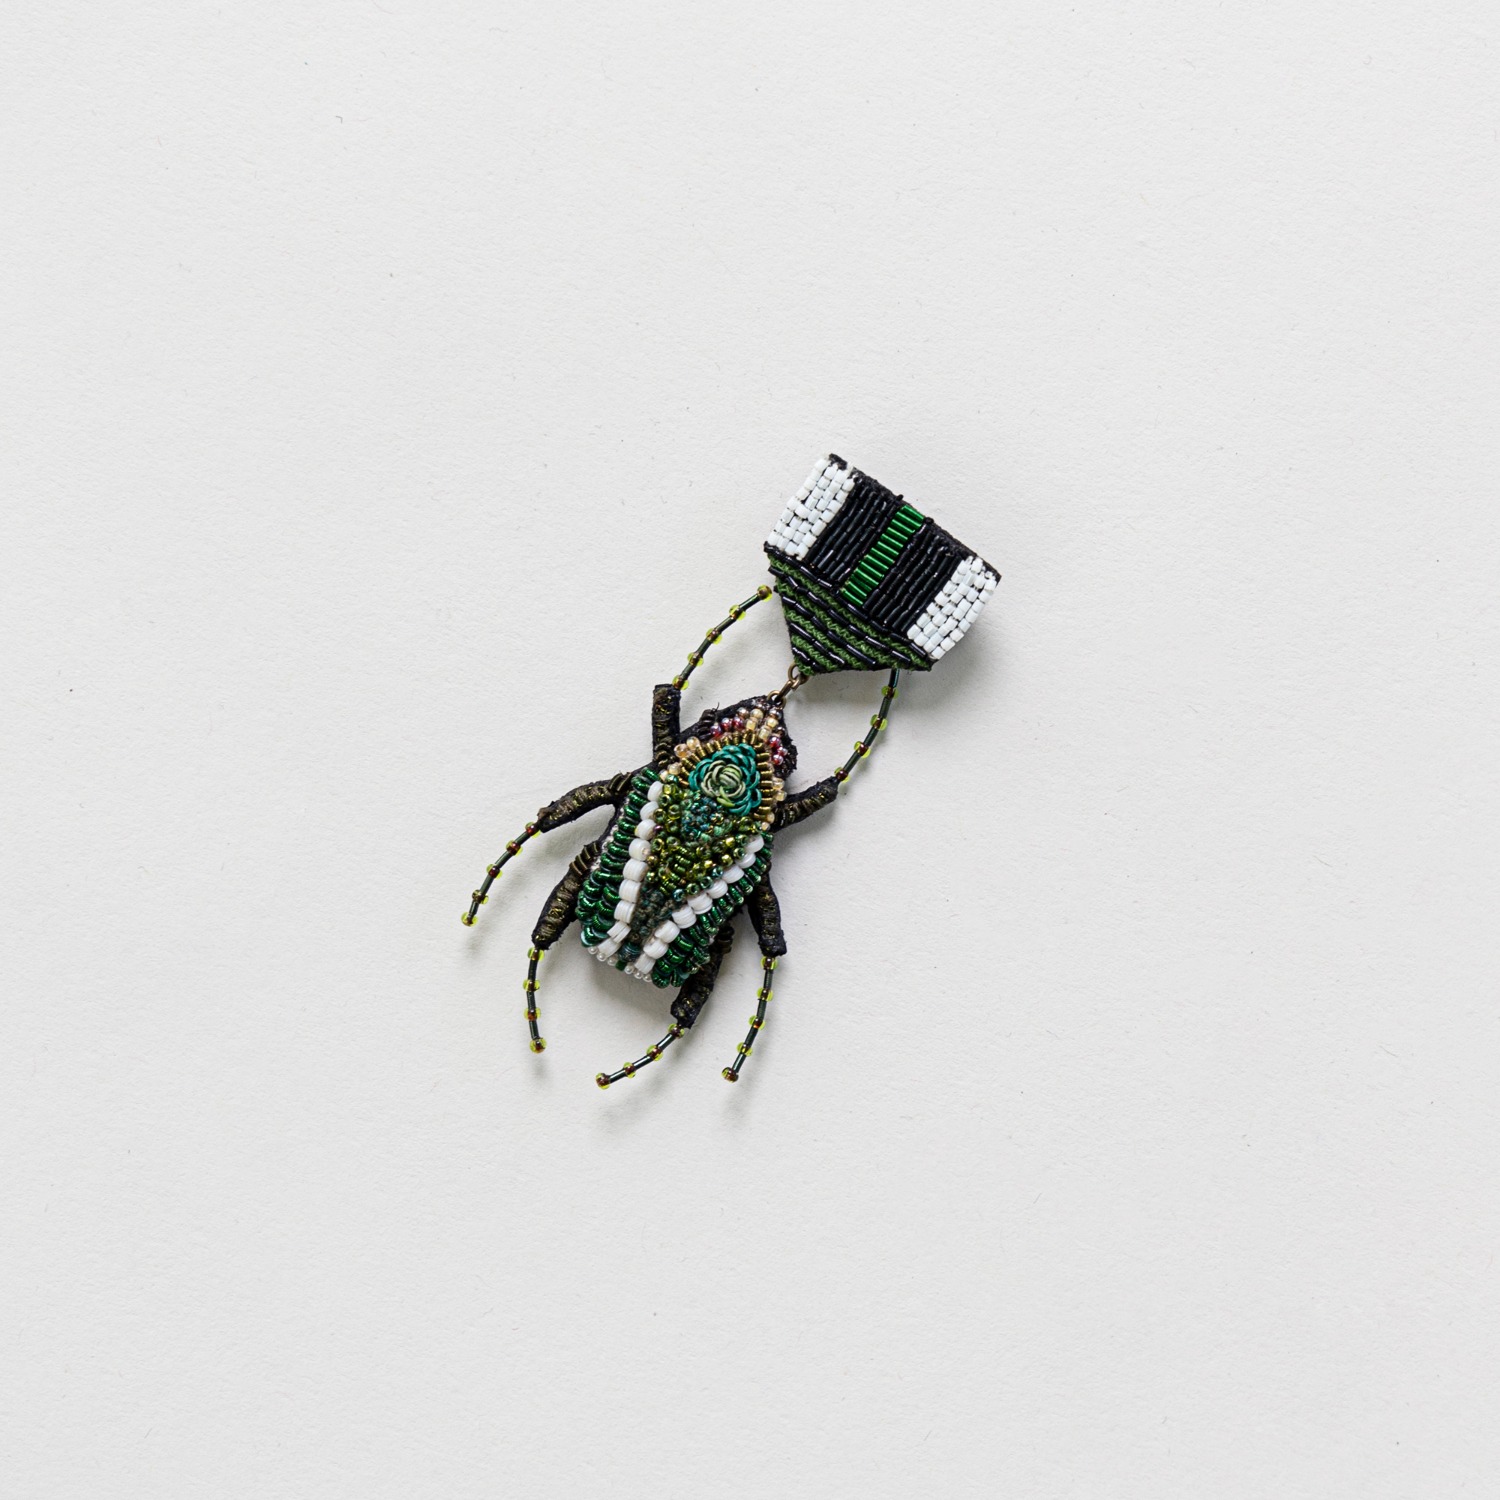 TROVELORE Striped Green Beetle Honor Medal Brooch Pin